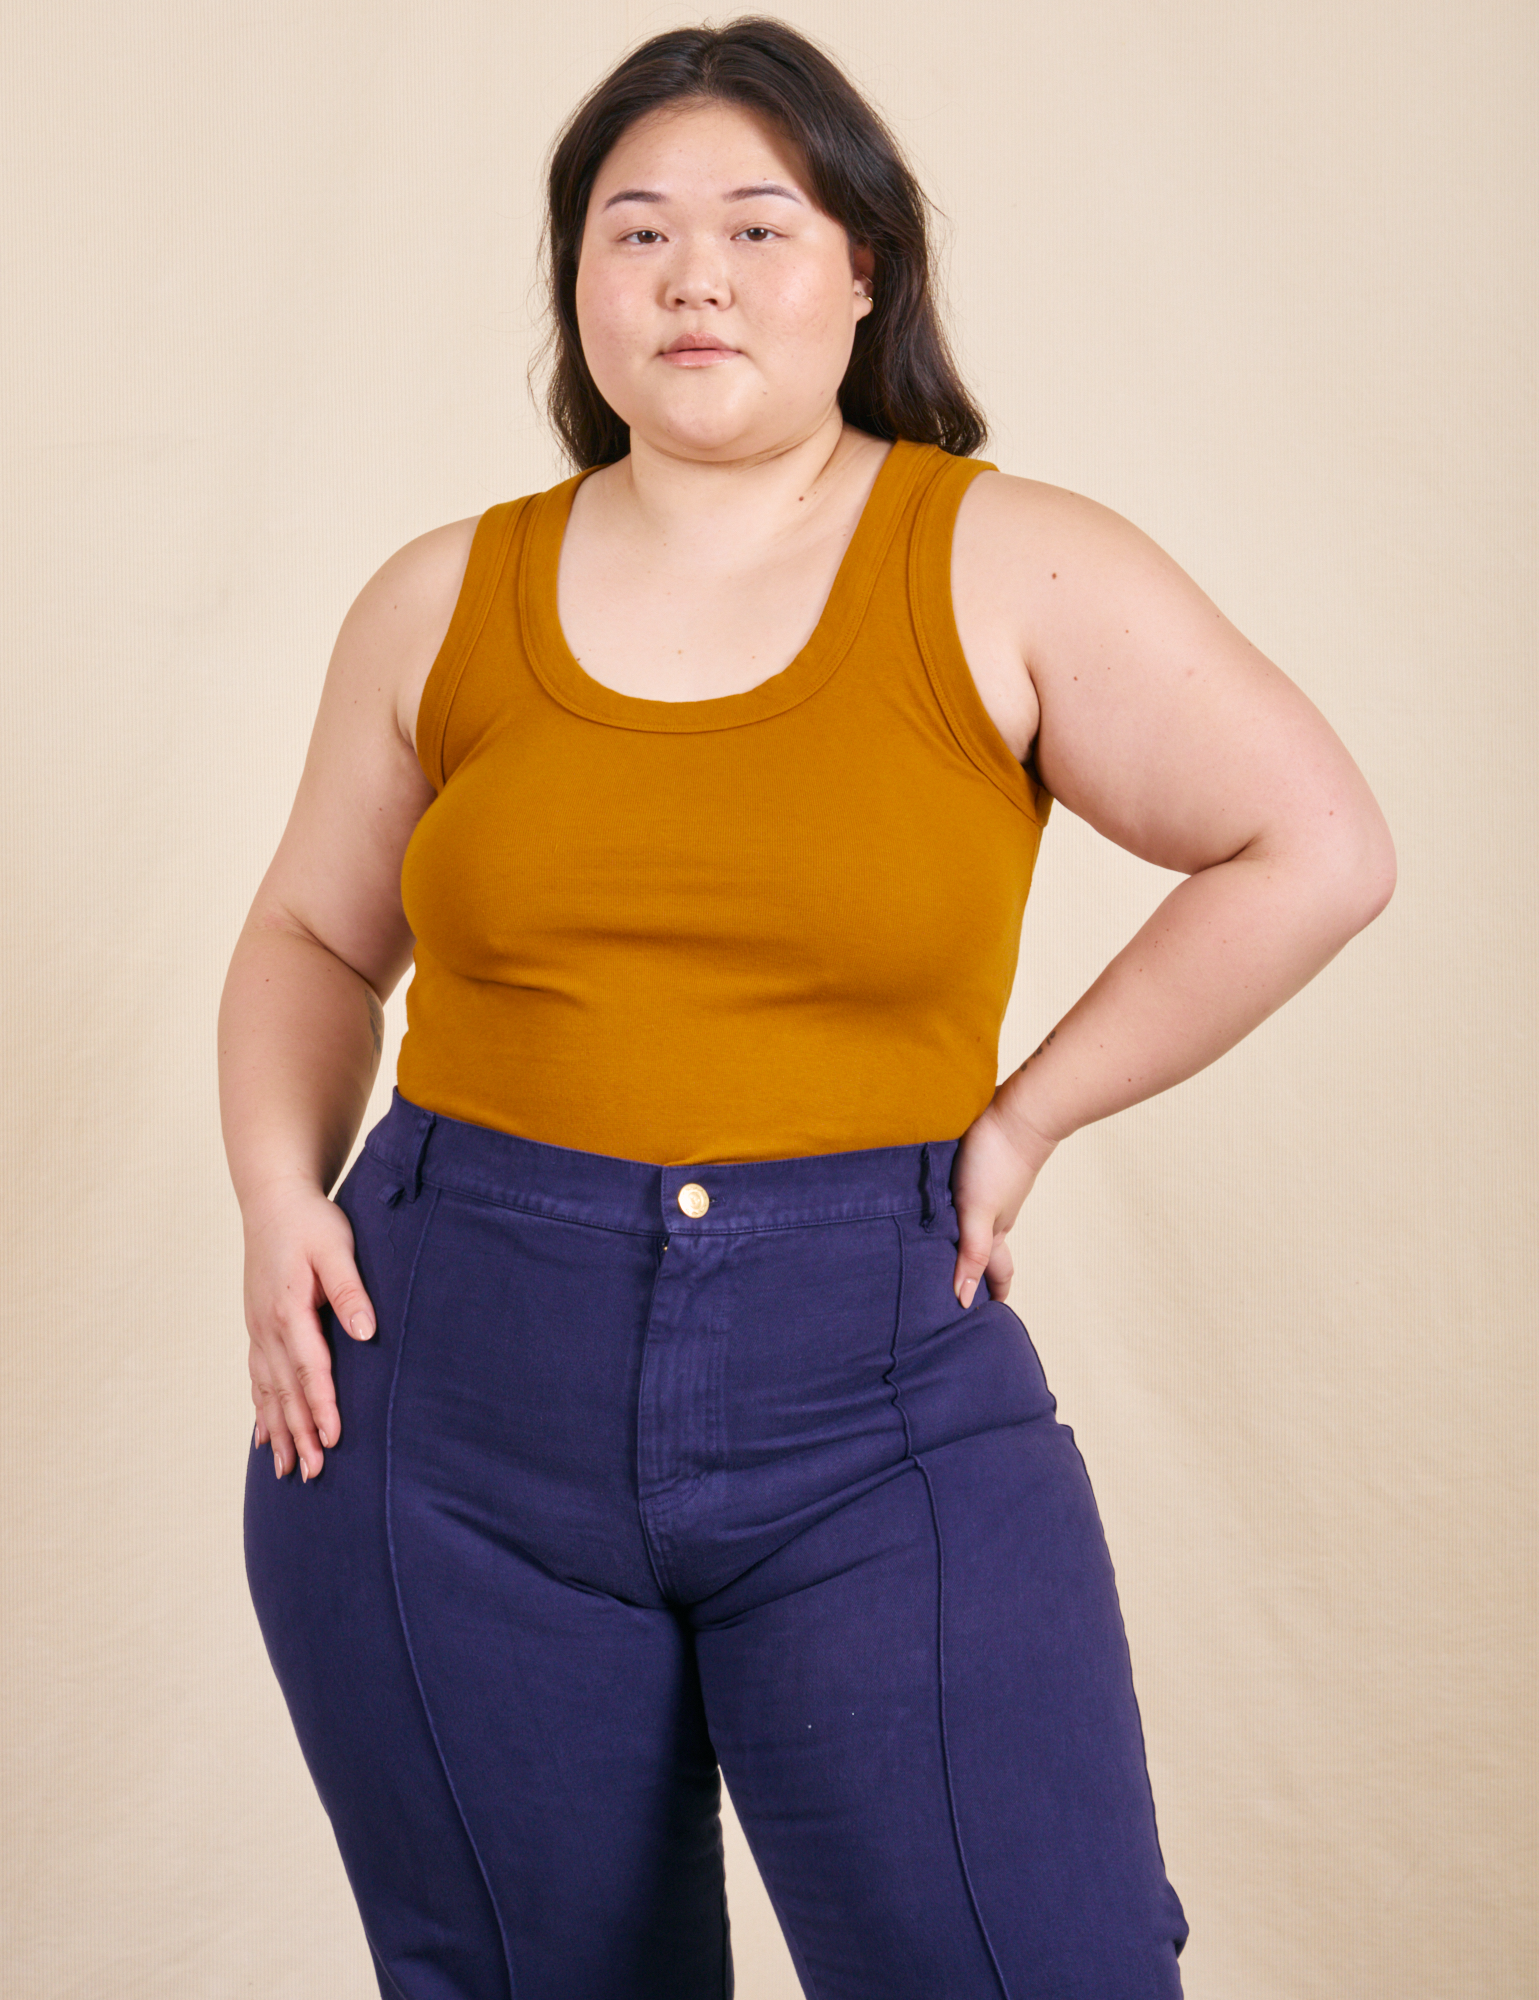 Ashley is wearing L Tank Top in Spicy Mustard paired with navy Western Pants